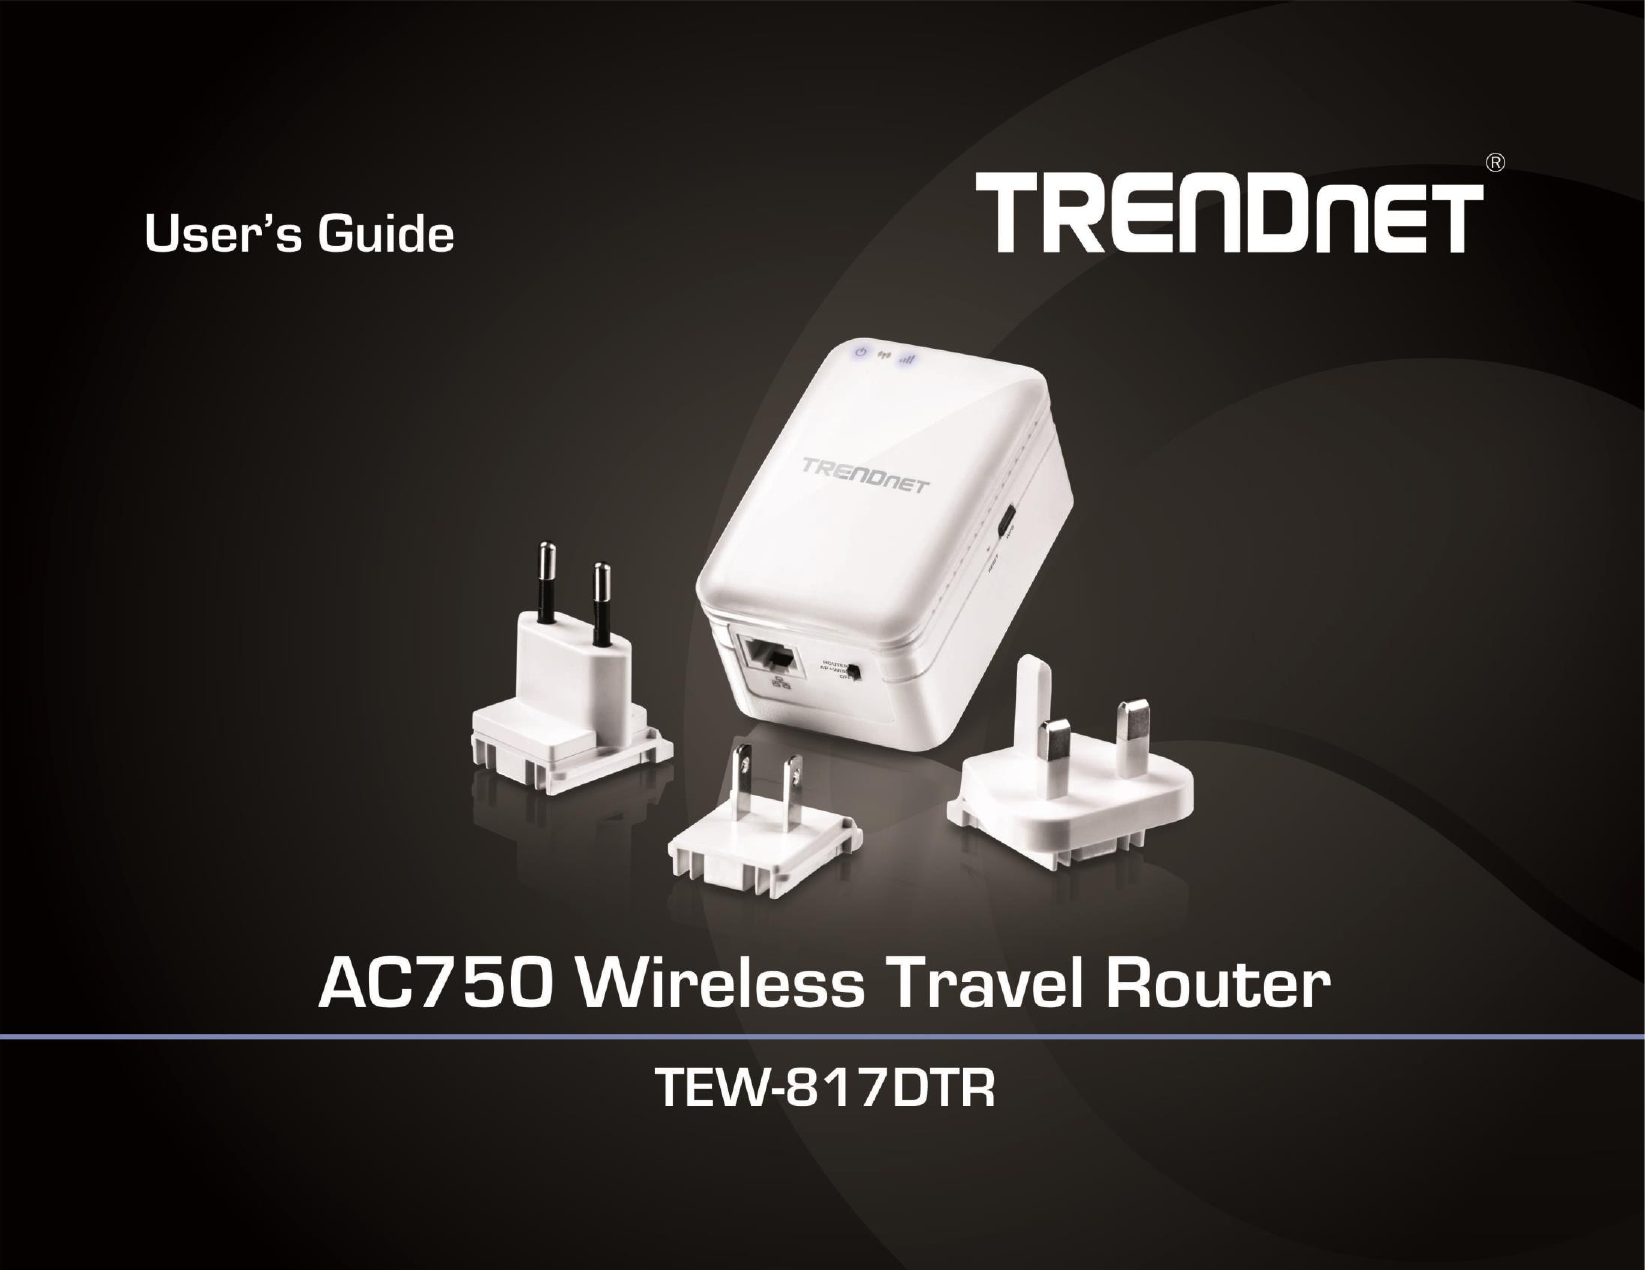                   © Copyright 2015 TRENDnet. All Rights Reserved.  TRENDnet User’s Guide Cover Page                                                                    